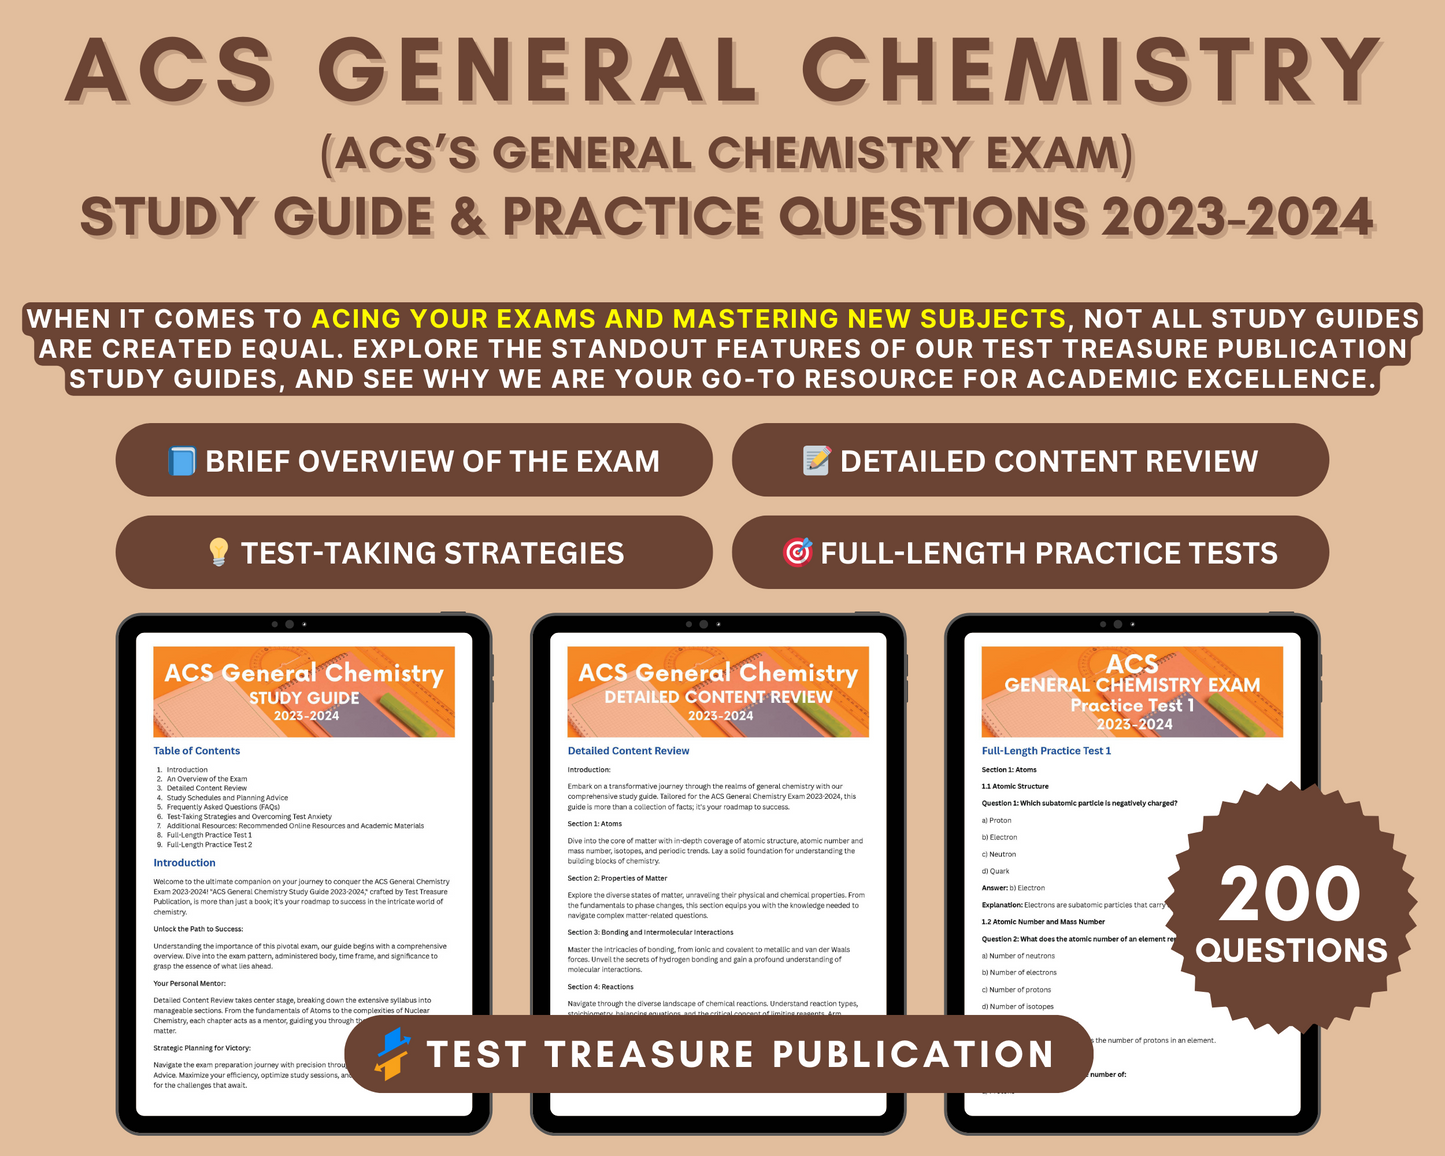 ACS General Chemistry Study Guide 2023-2024: Master Atomic Structure, Reactions, and More for Exam Success!